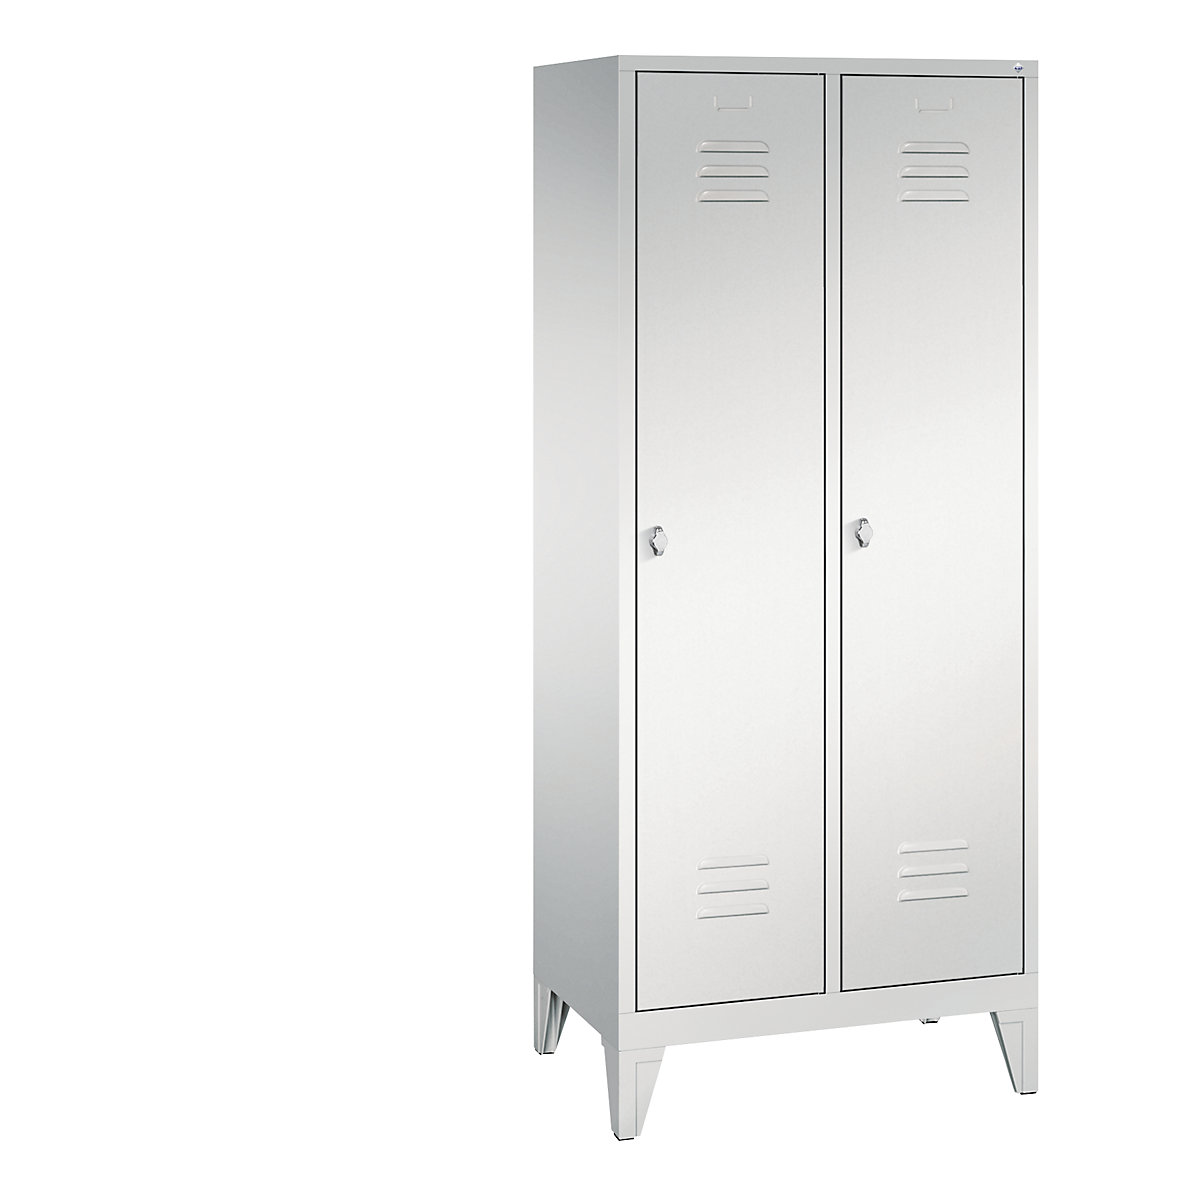 CLASSIC cloakroom locker with feet – C+P, 2 compartments, compartment width 400 mm, light grey-6